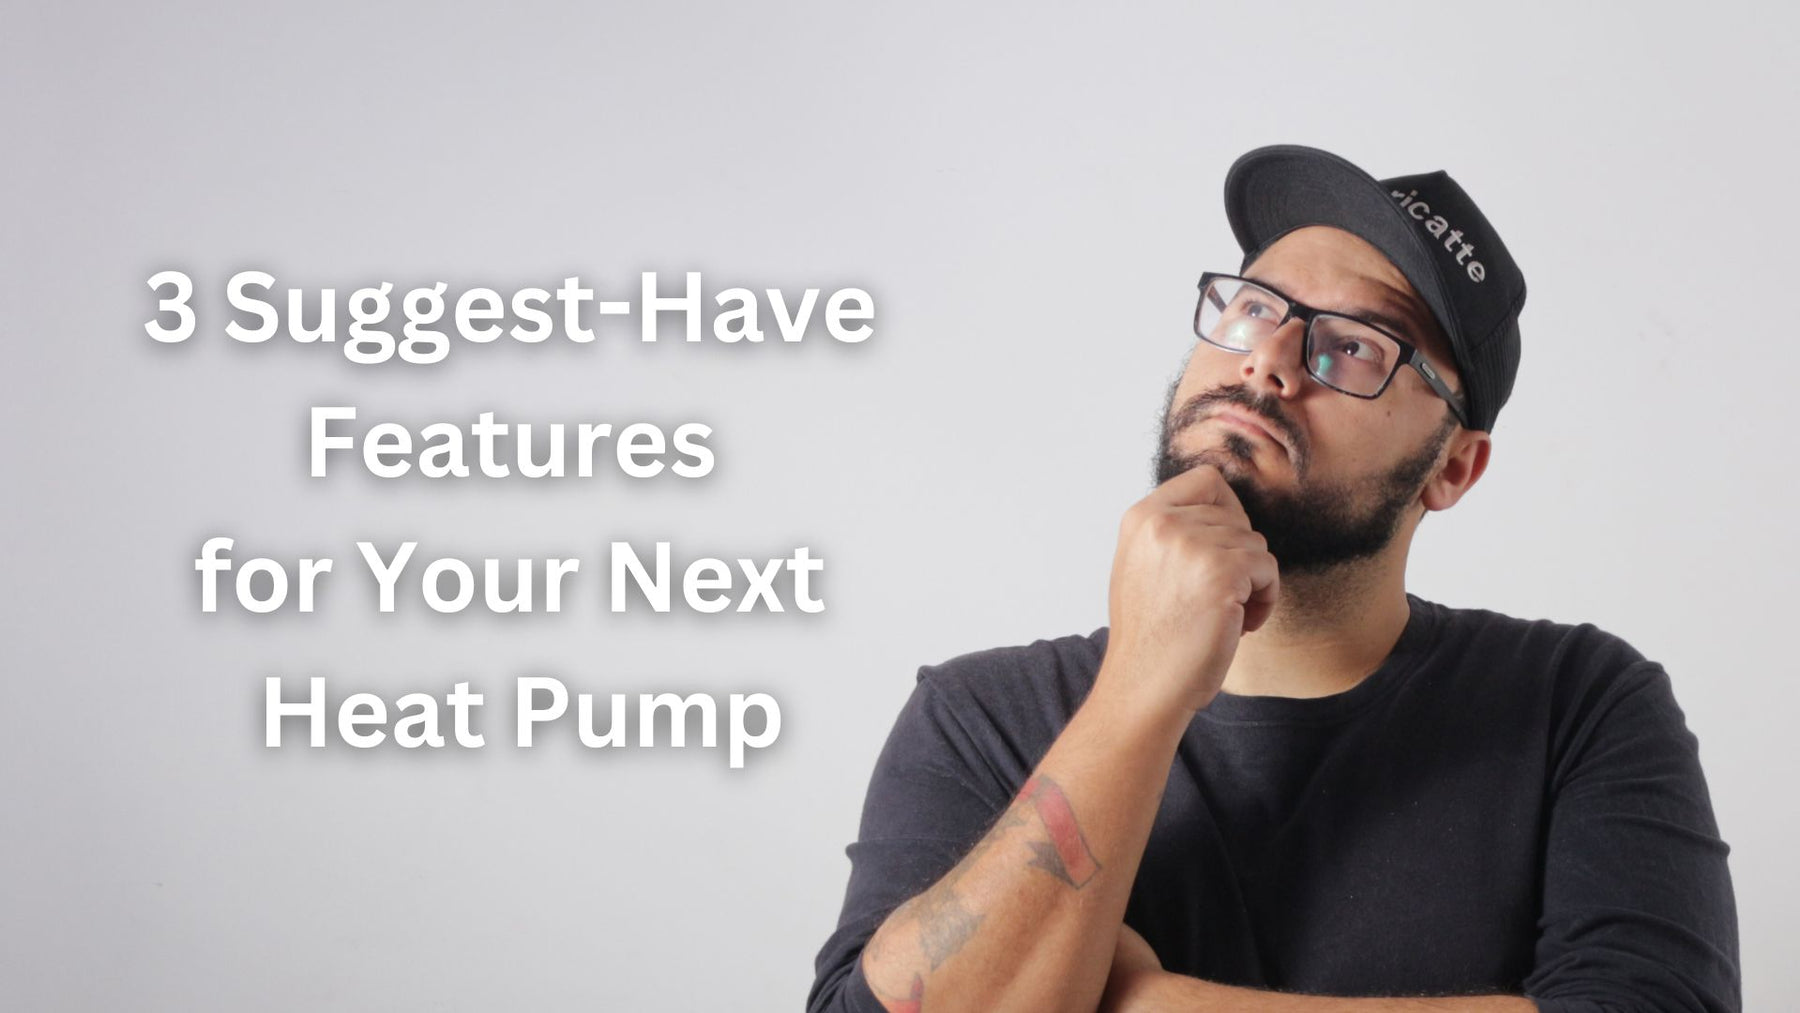 A man is thinking of three must-have features for her next heat pump